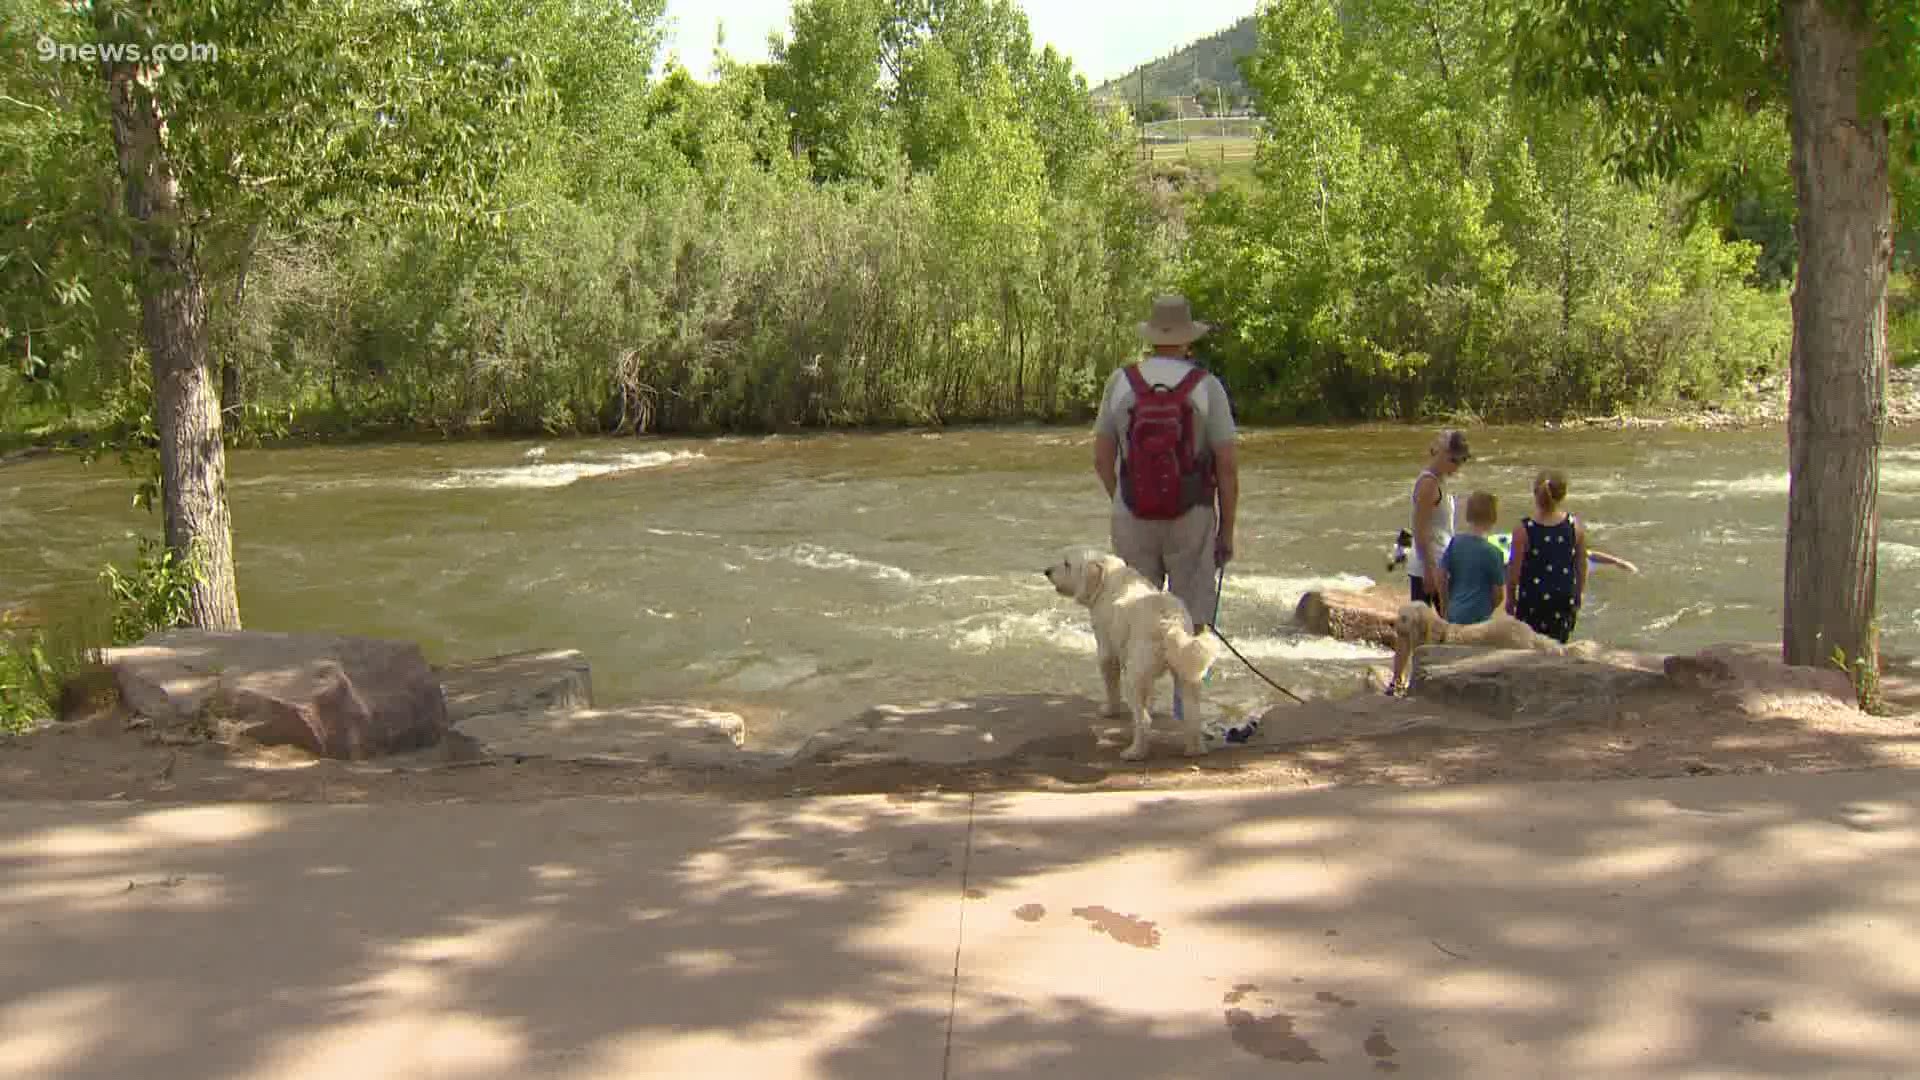 Golden has closed access to Clear Creek as a way of discouraging large gatherings over the July 4 holiday weekend.